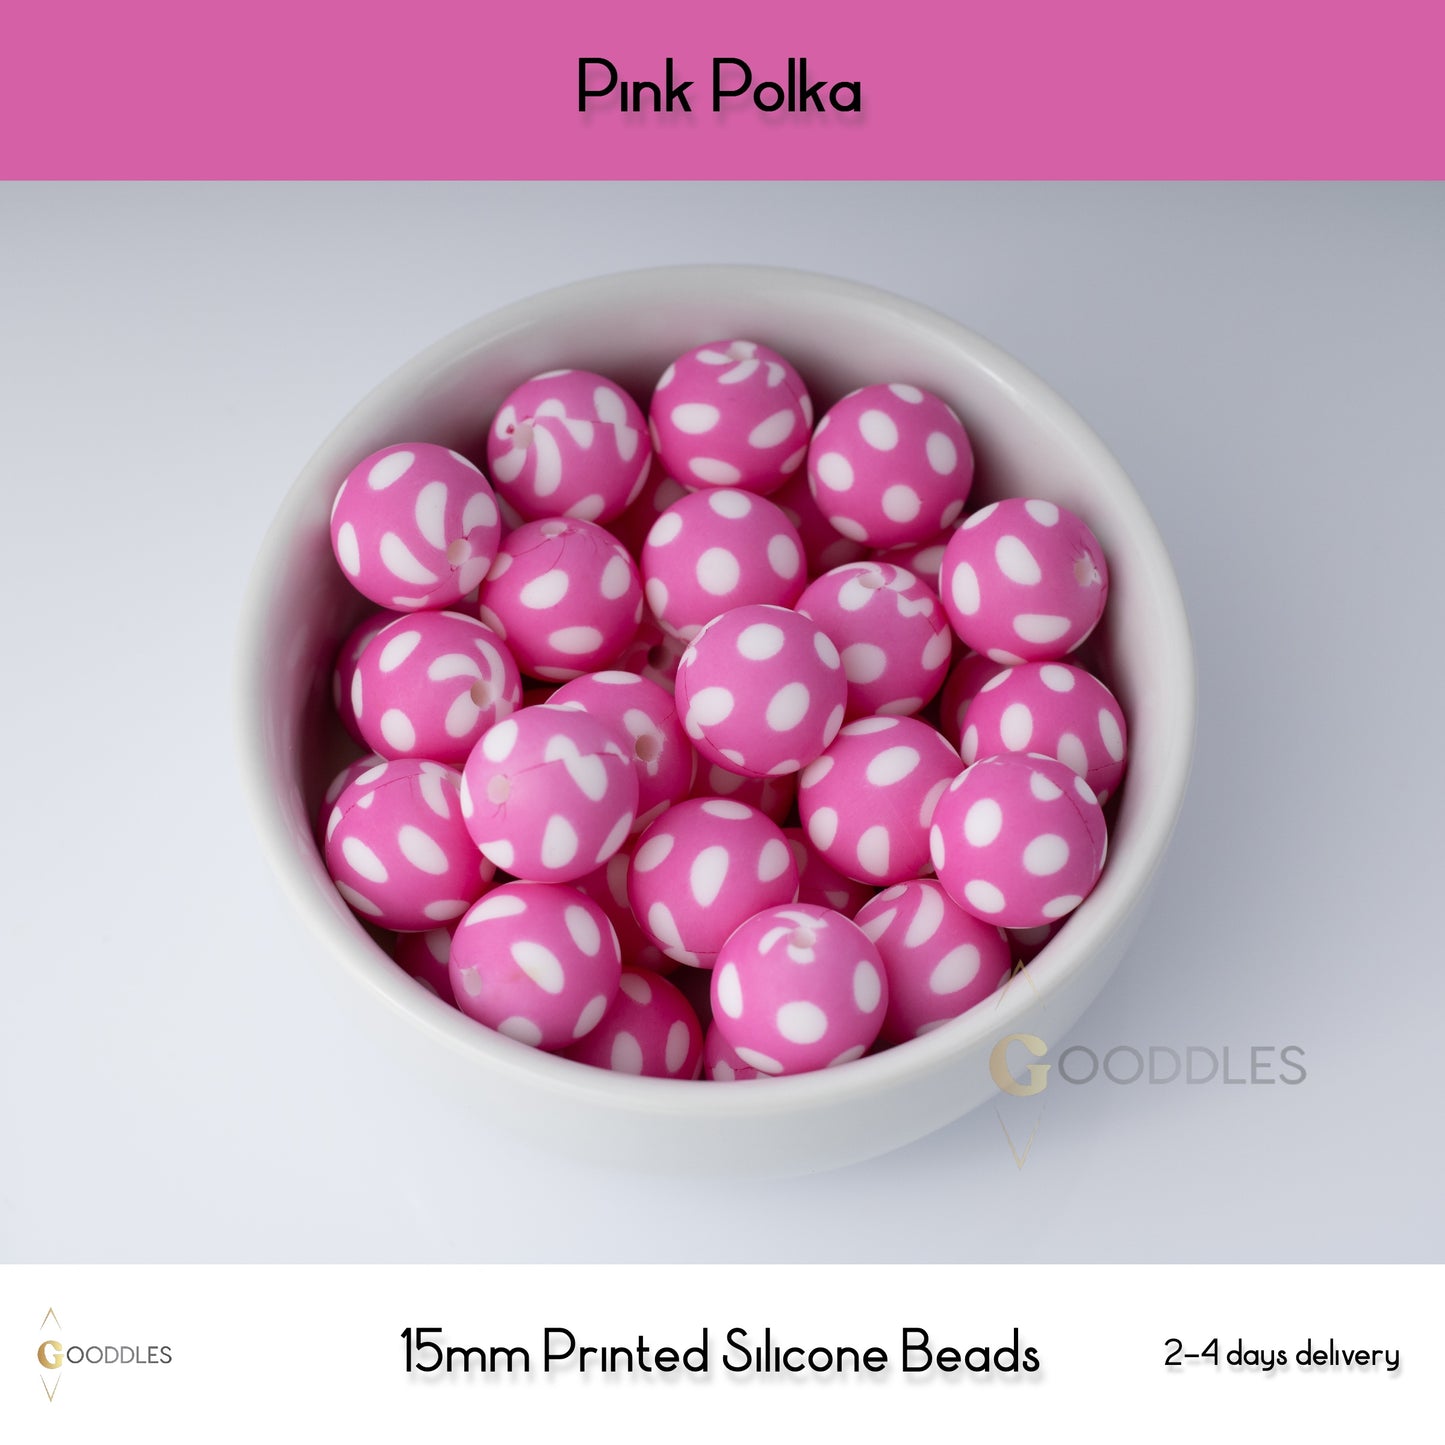 5pcs, Pink Polka Silicone Beads Printed Round Silicone Beads